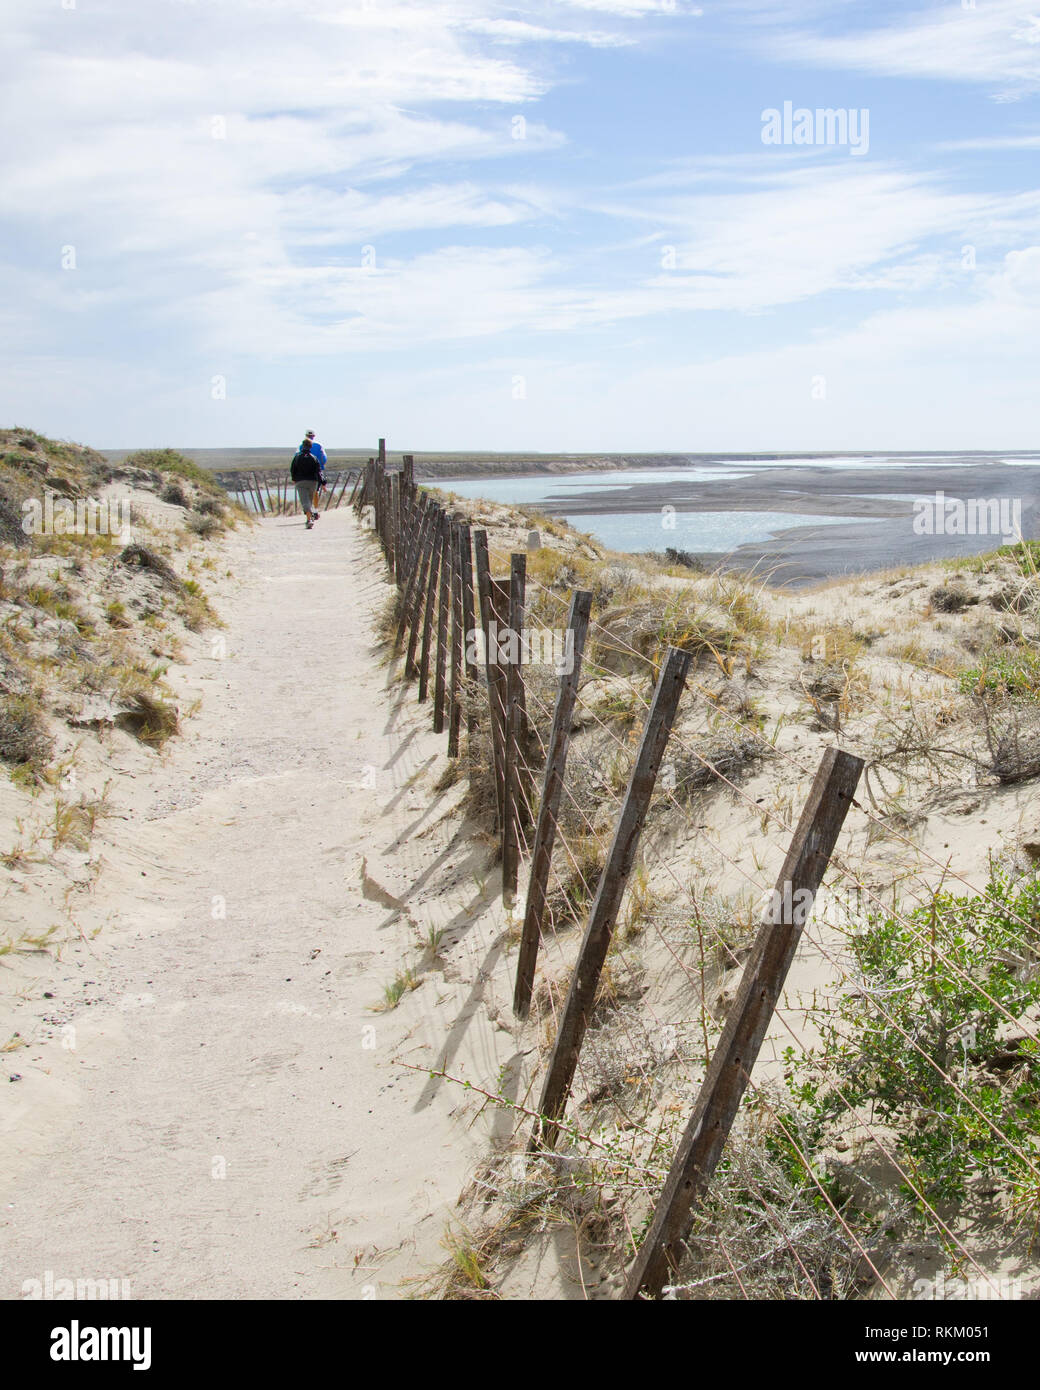 Walkers explore the barren rough coast line of Peninsula Valdes, Argentina, follow trail and fence line to view scenic Caleta Valdes. Stock Photo